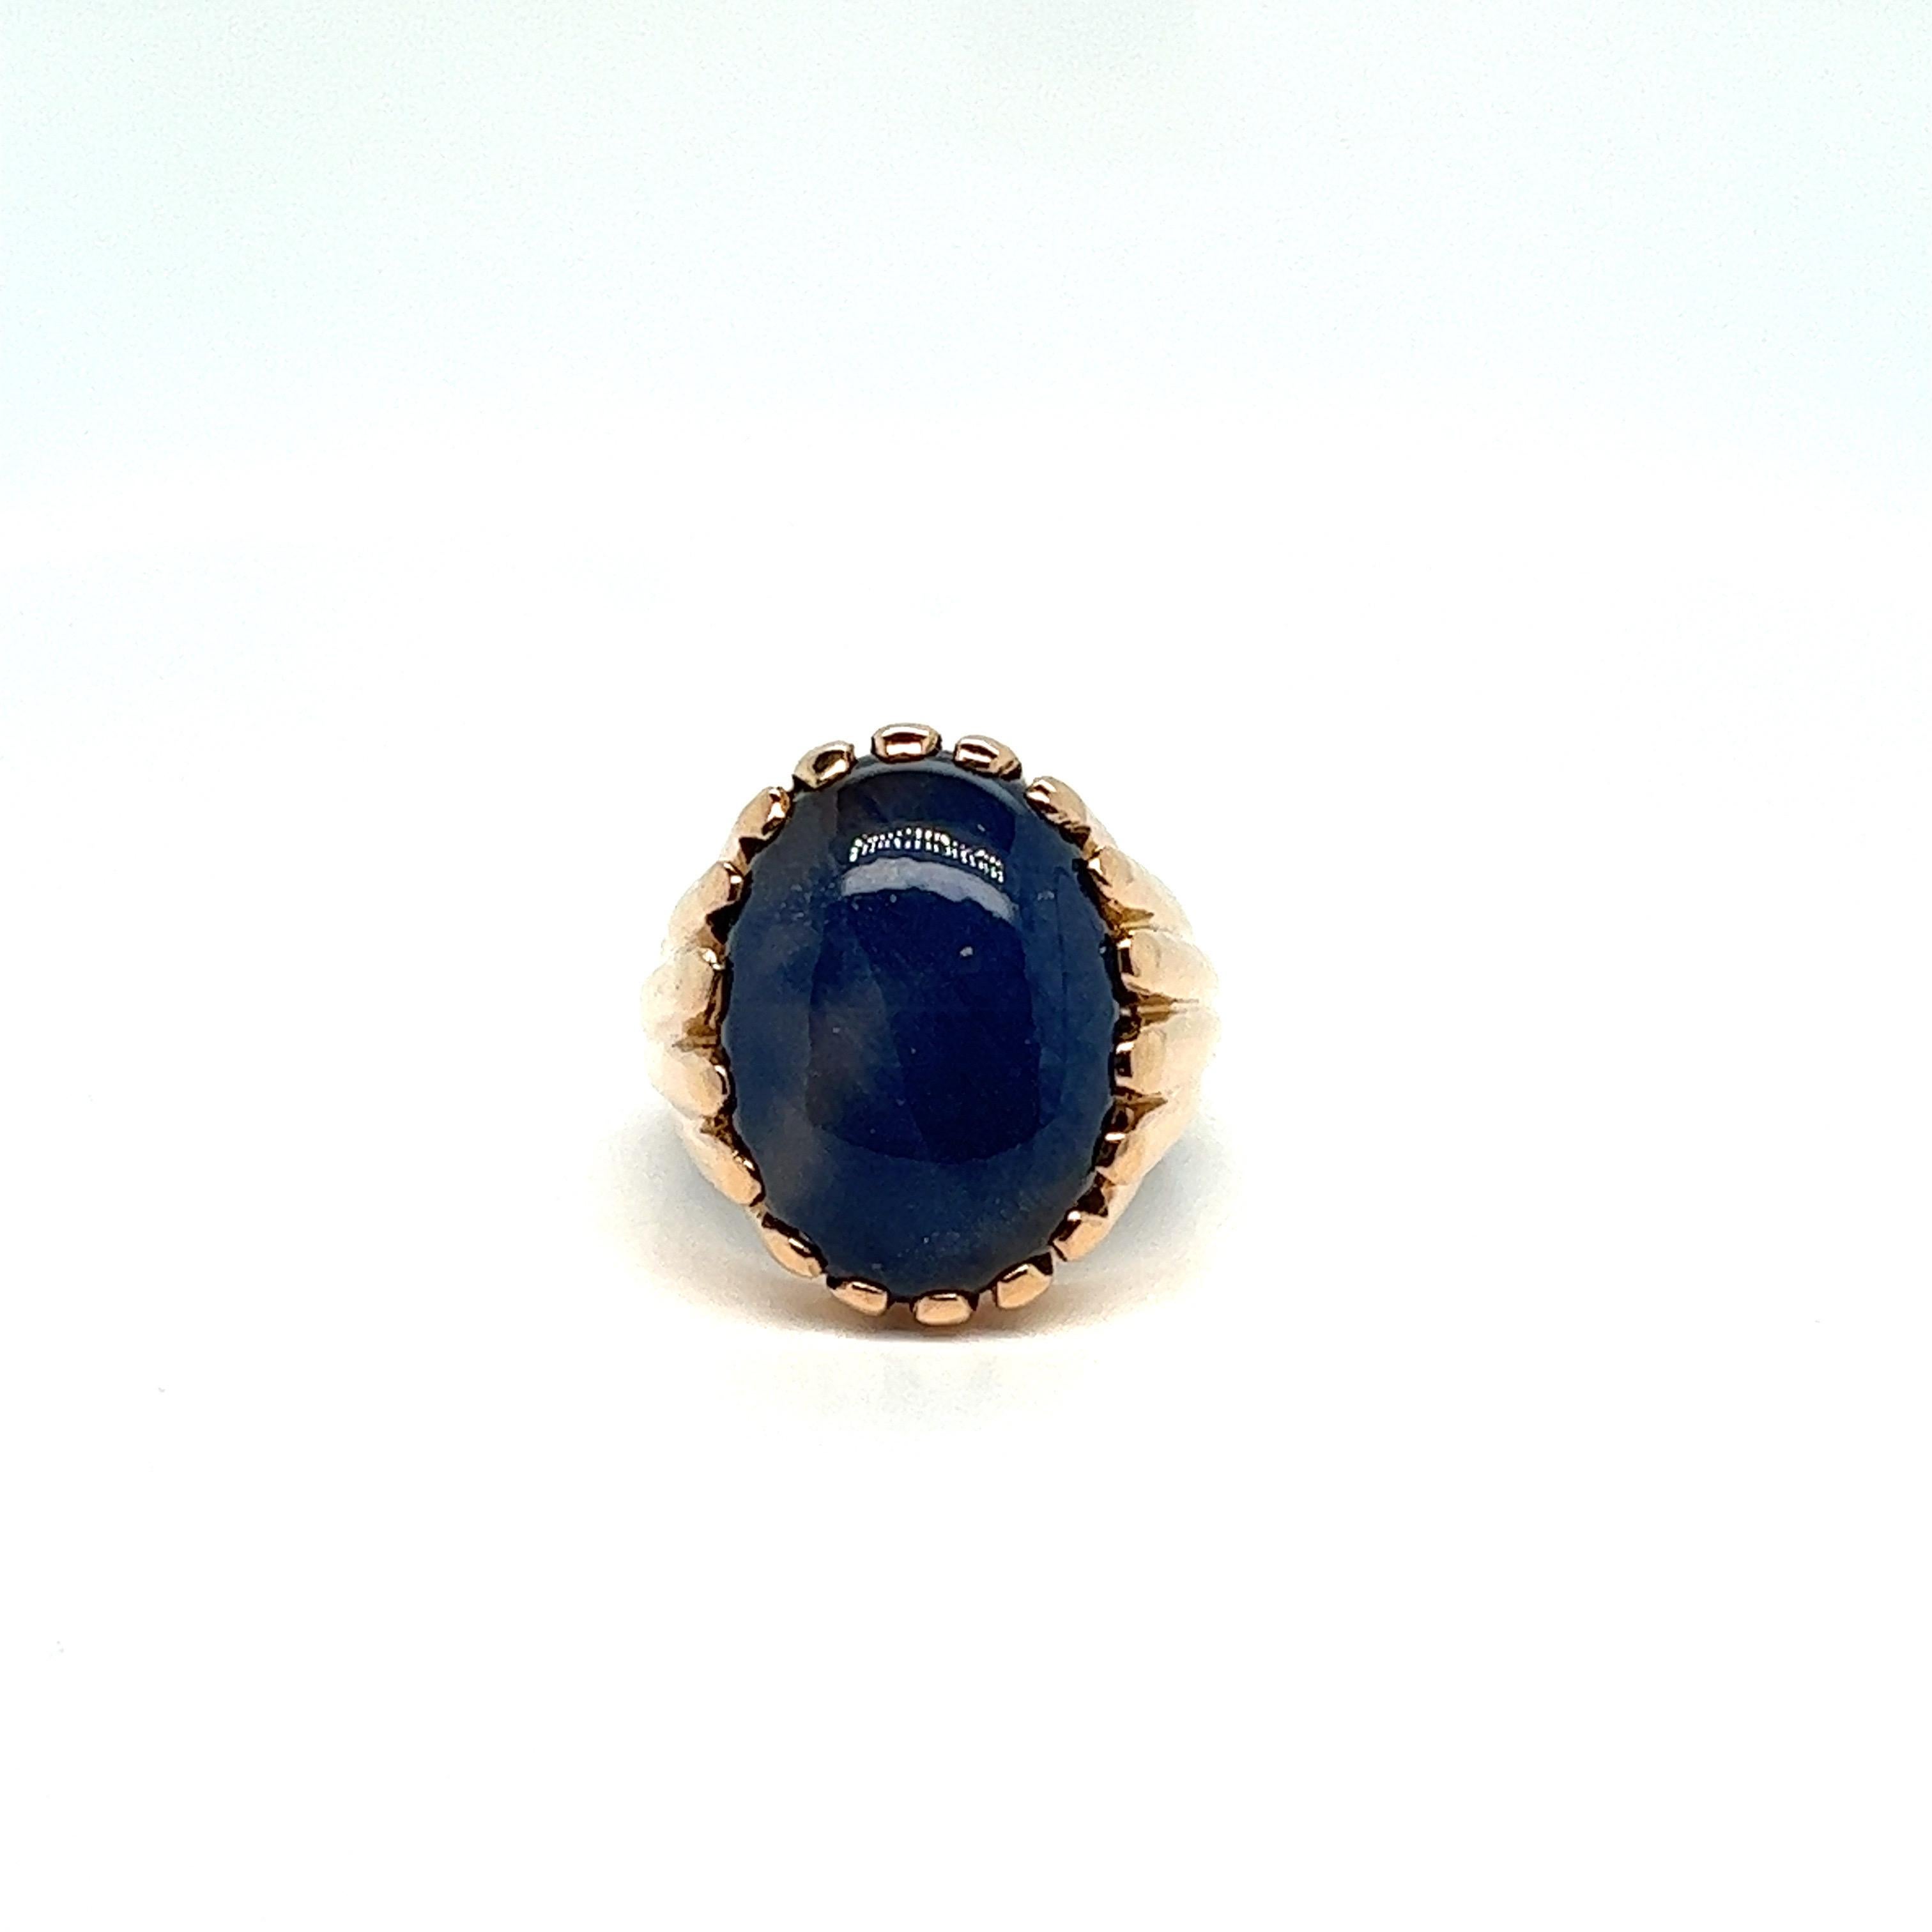 Modern French Chevalière Ring with a Blue Corundum Cabochon

Beautiful signet ring fluted, decorated with a cabochon of Blue Corundum a size of 15mm x 20 mm. This starry ring is perfect to give a touch of color to your outfit. An ideal combination